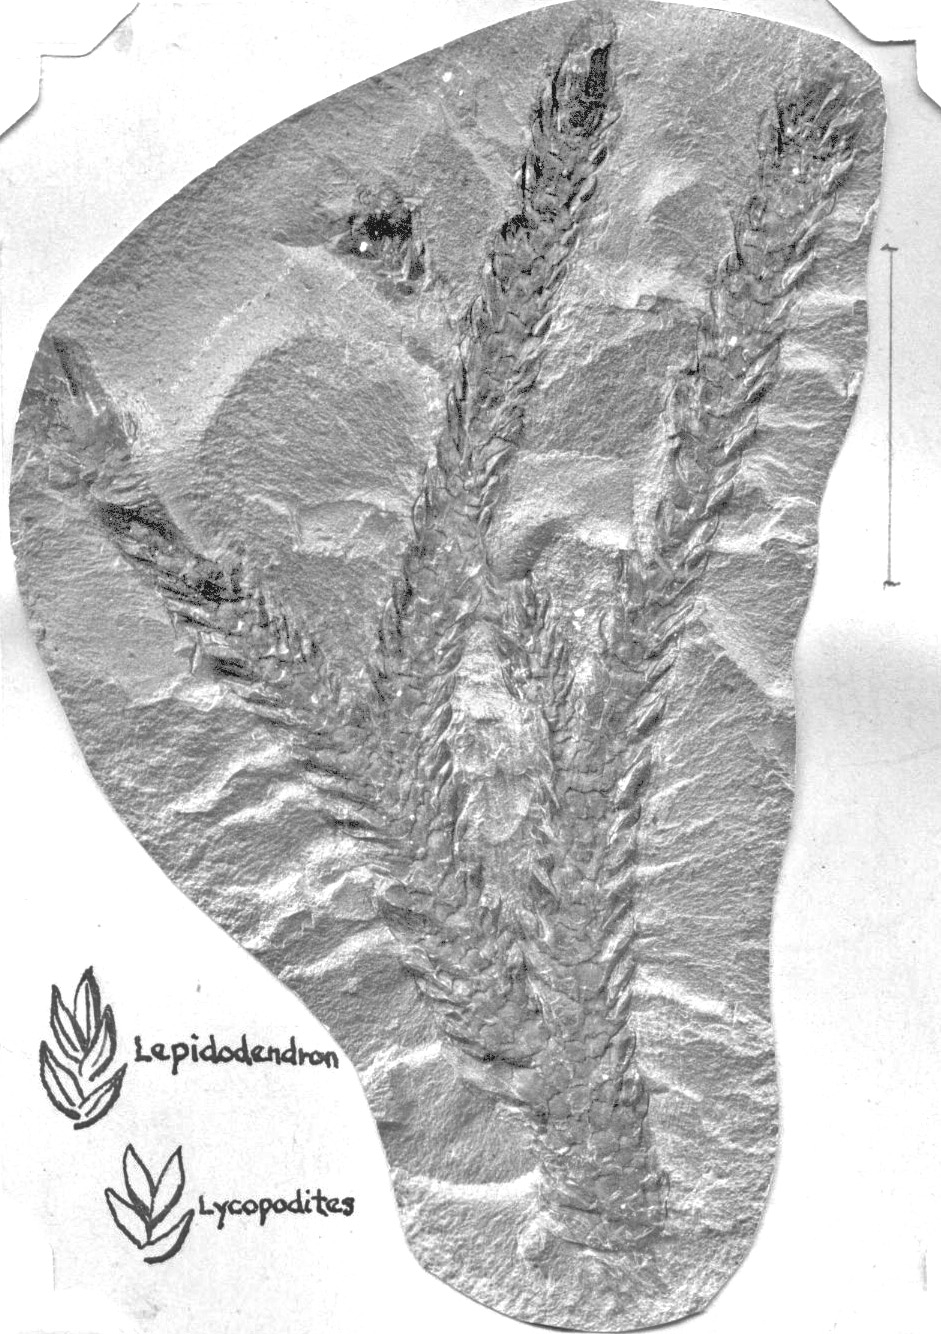 Lepidodendron and Lycopodites, photograph by GL, page 32